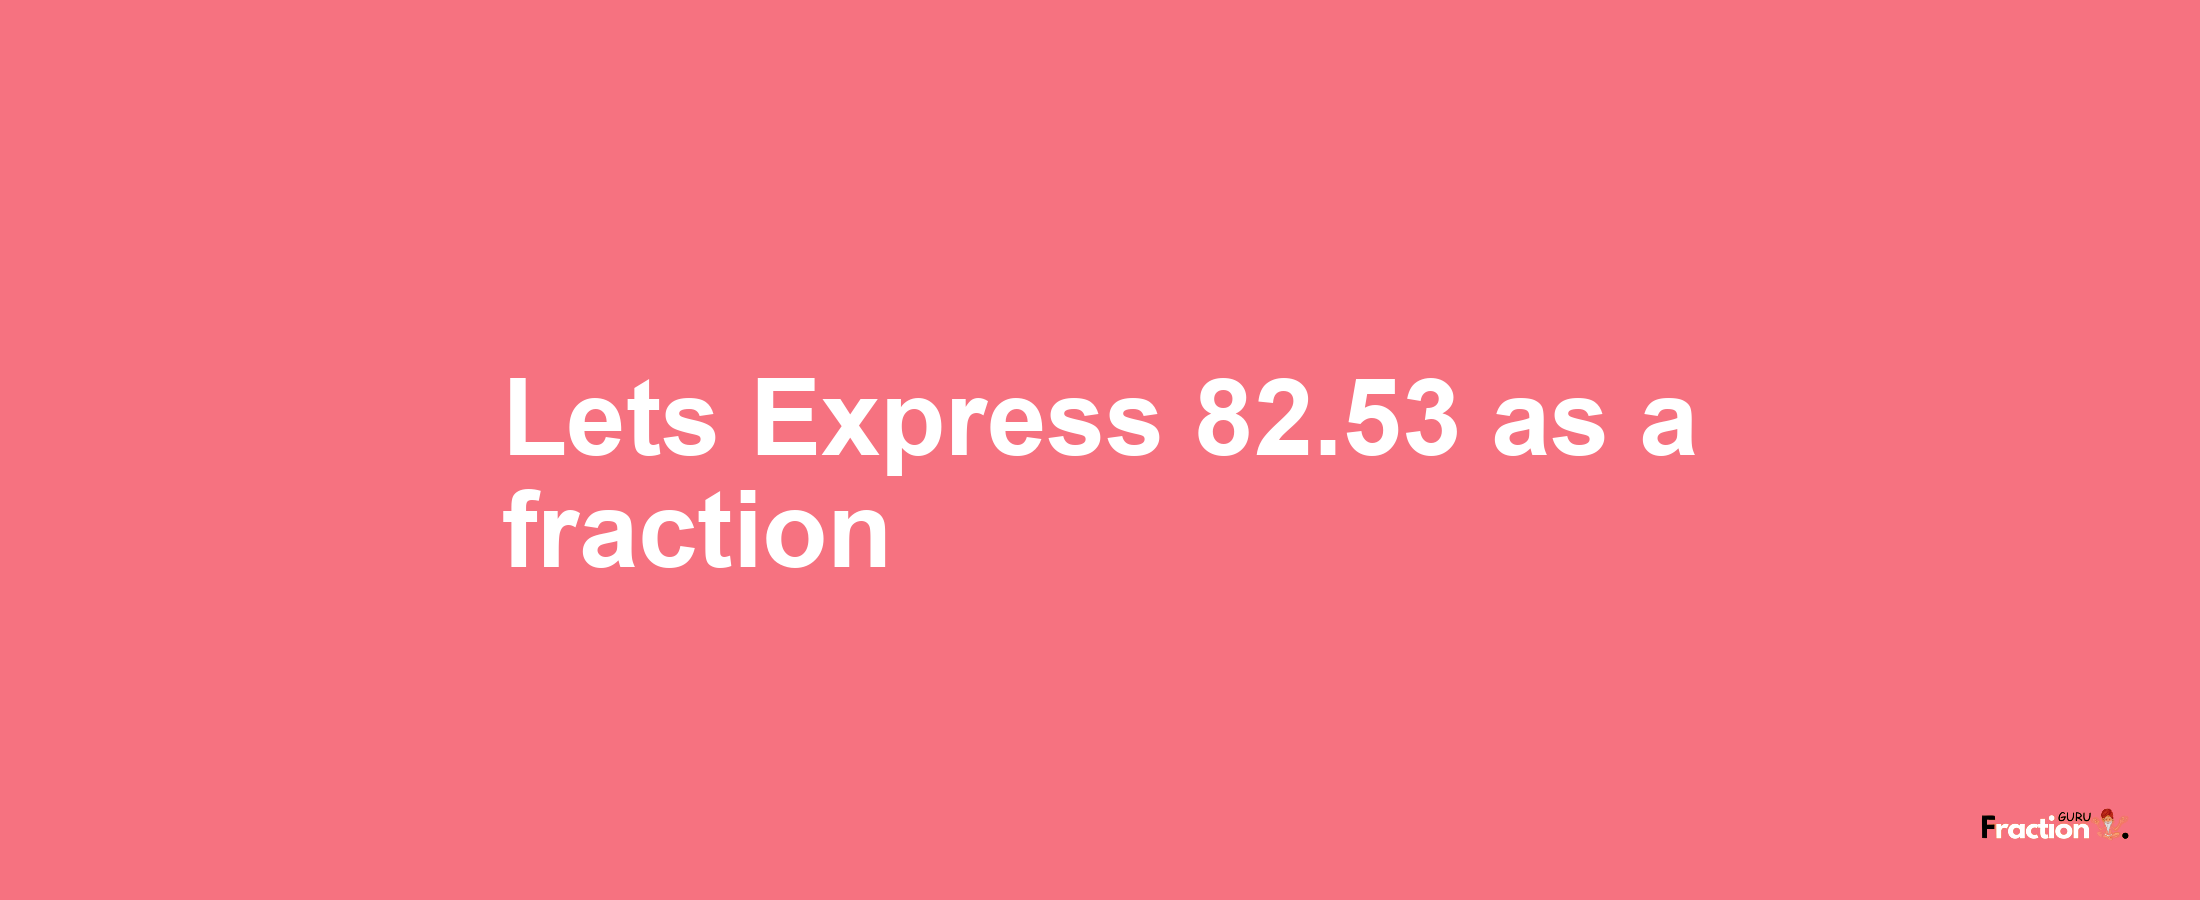 Lets Express 82.53 as afraction